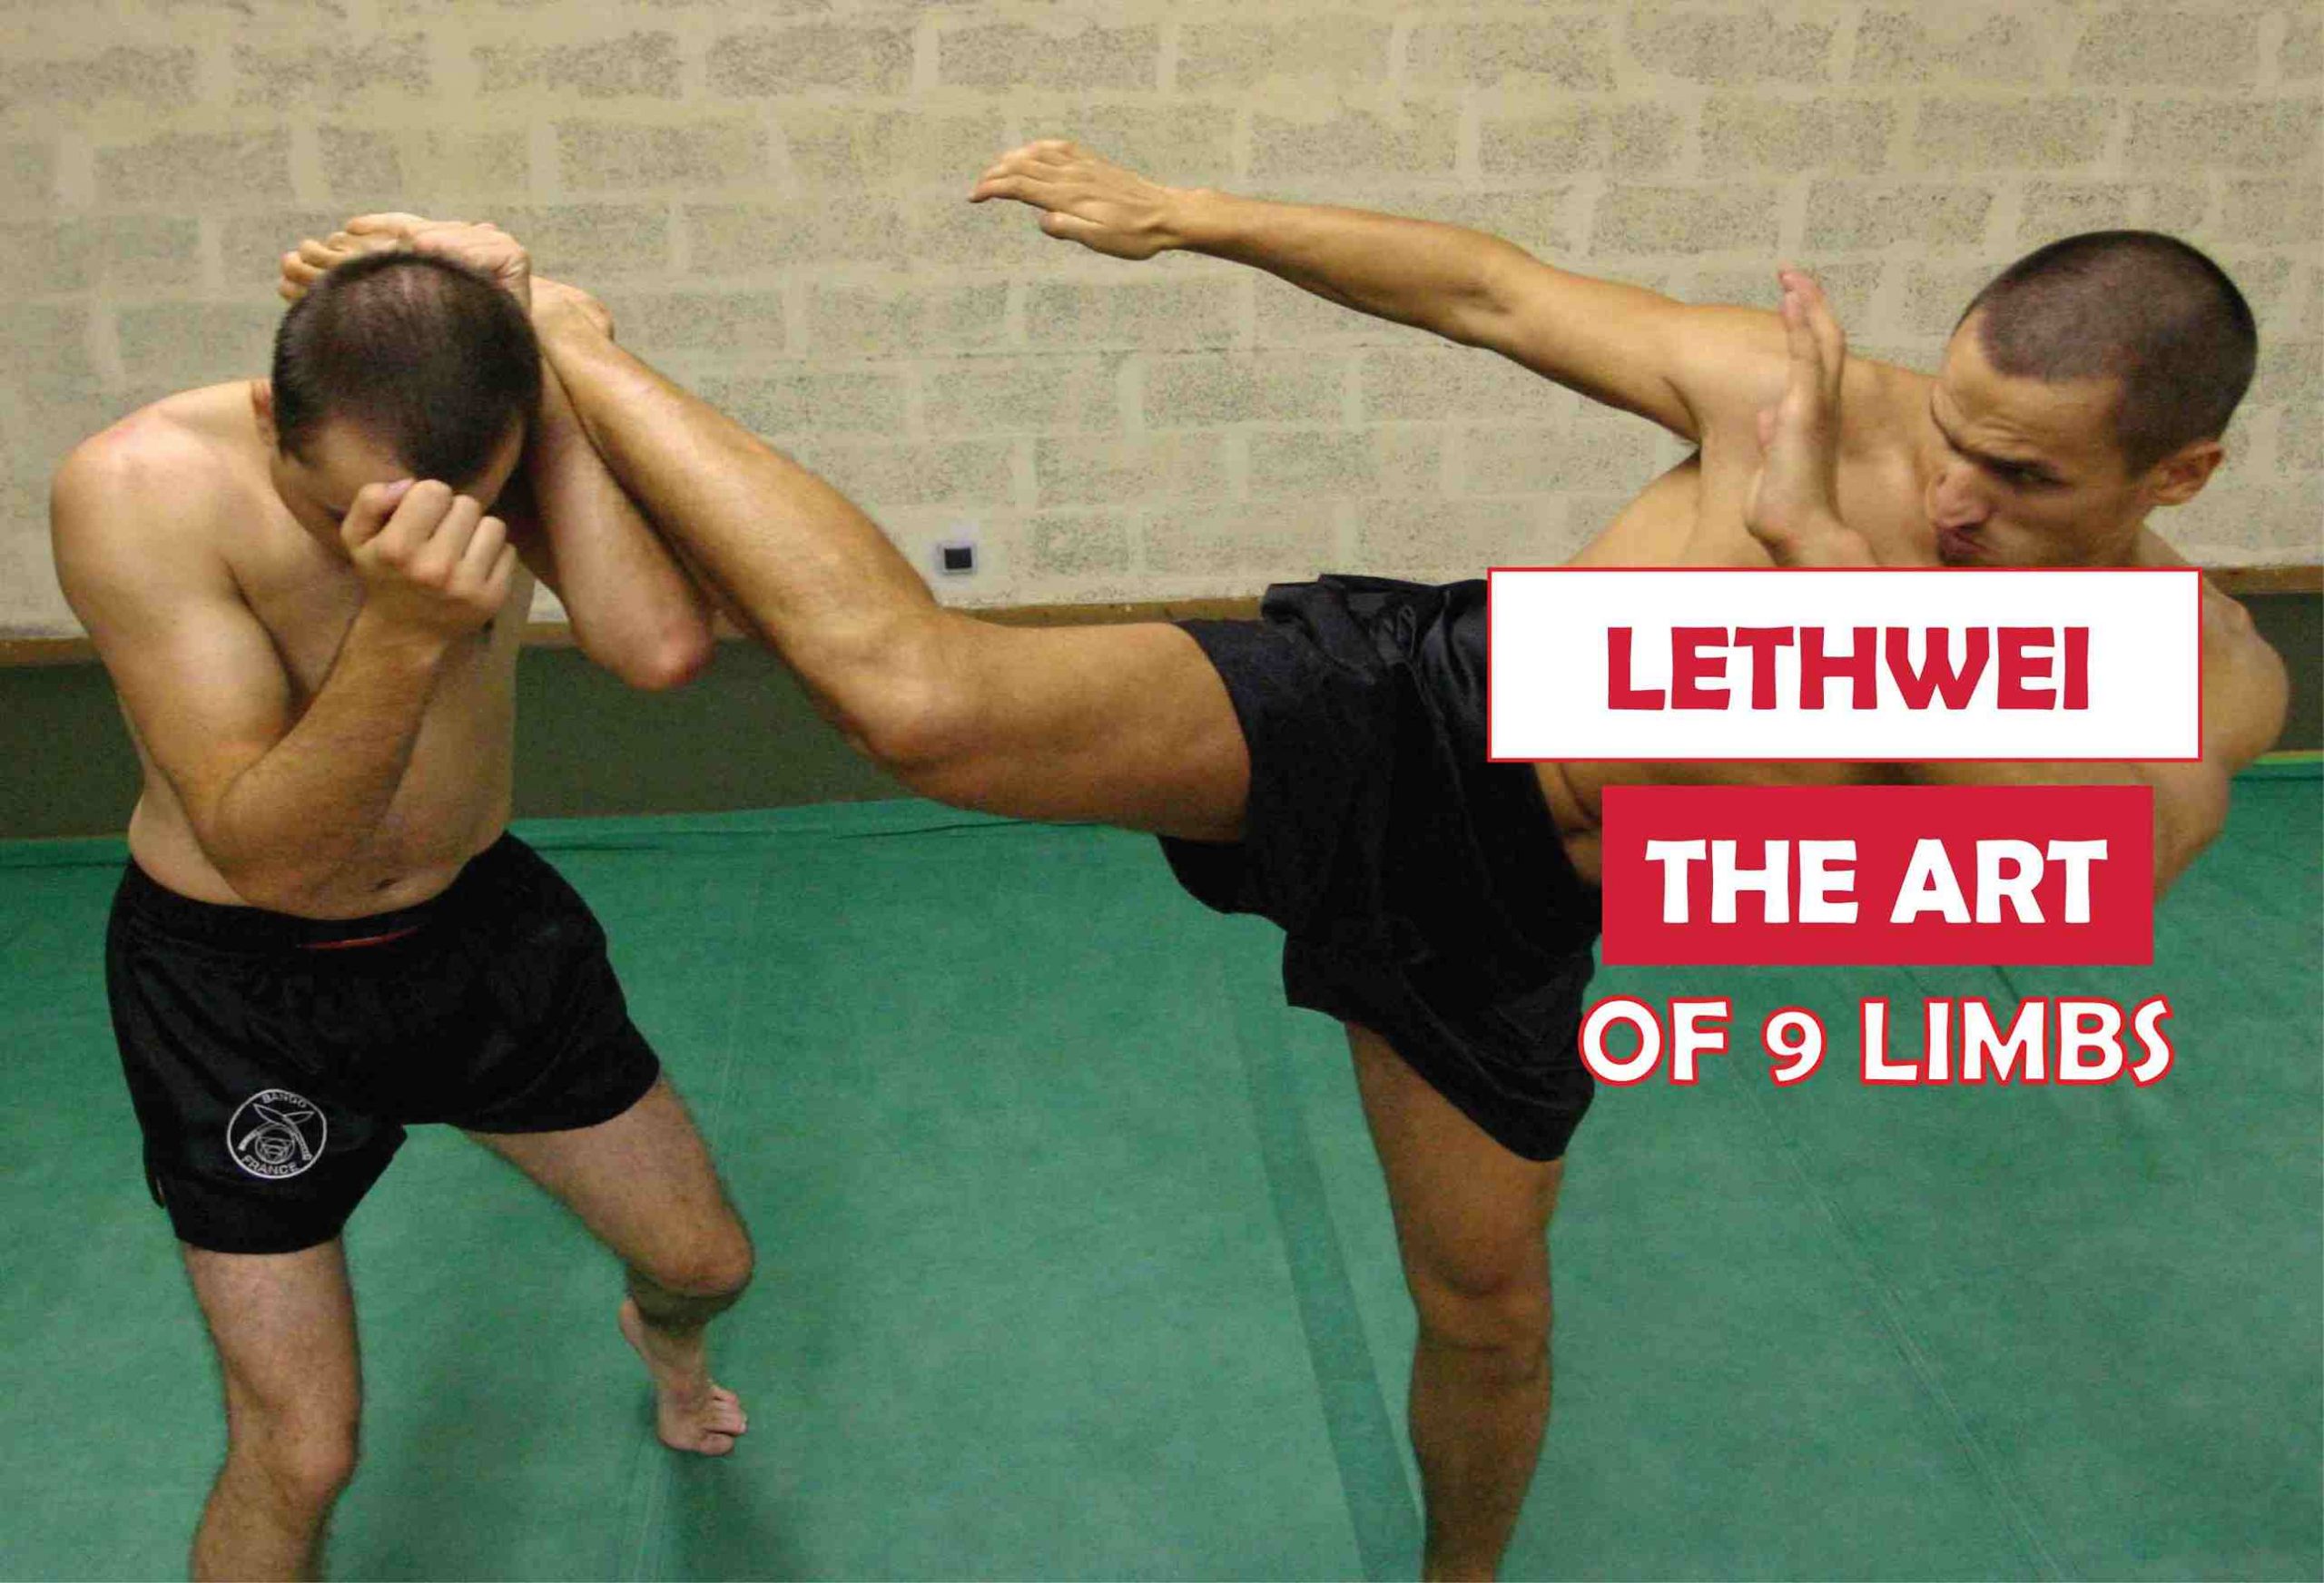 What is the Lethwei – The Art of 9 limbs